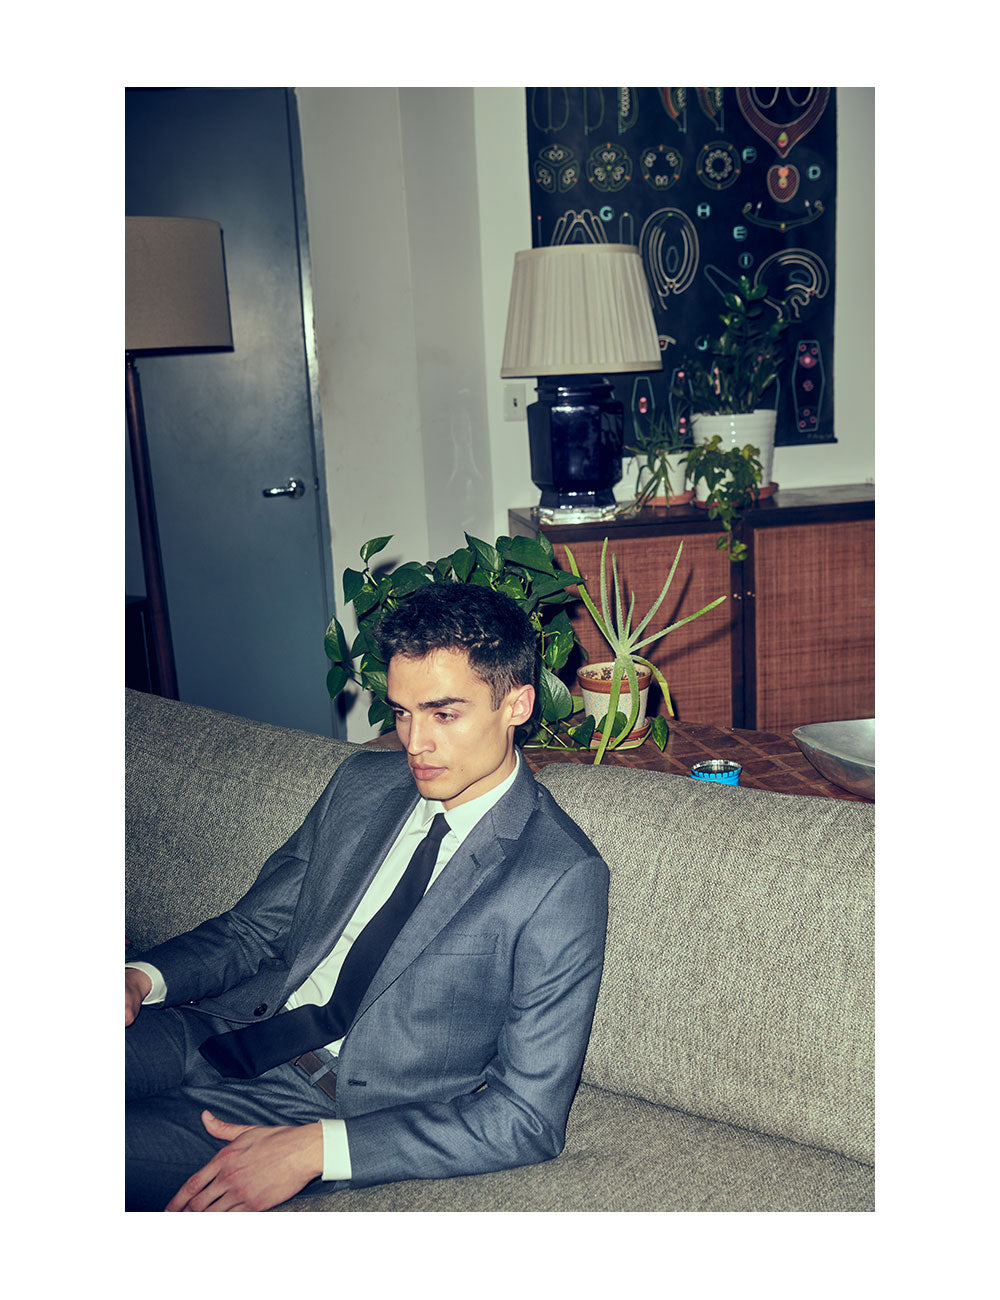 Model wearing charcoal suit, white dress shirt, dark blue knit tie, sitting on a couch in a NYC apartment.